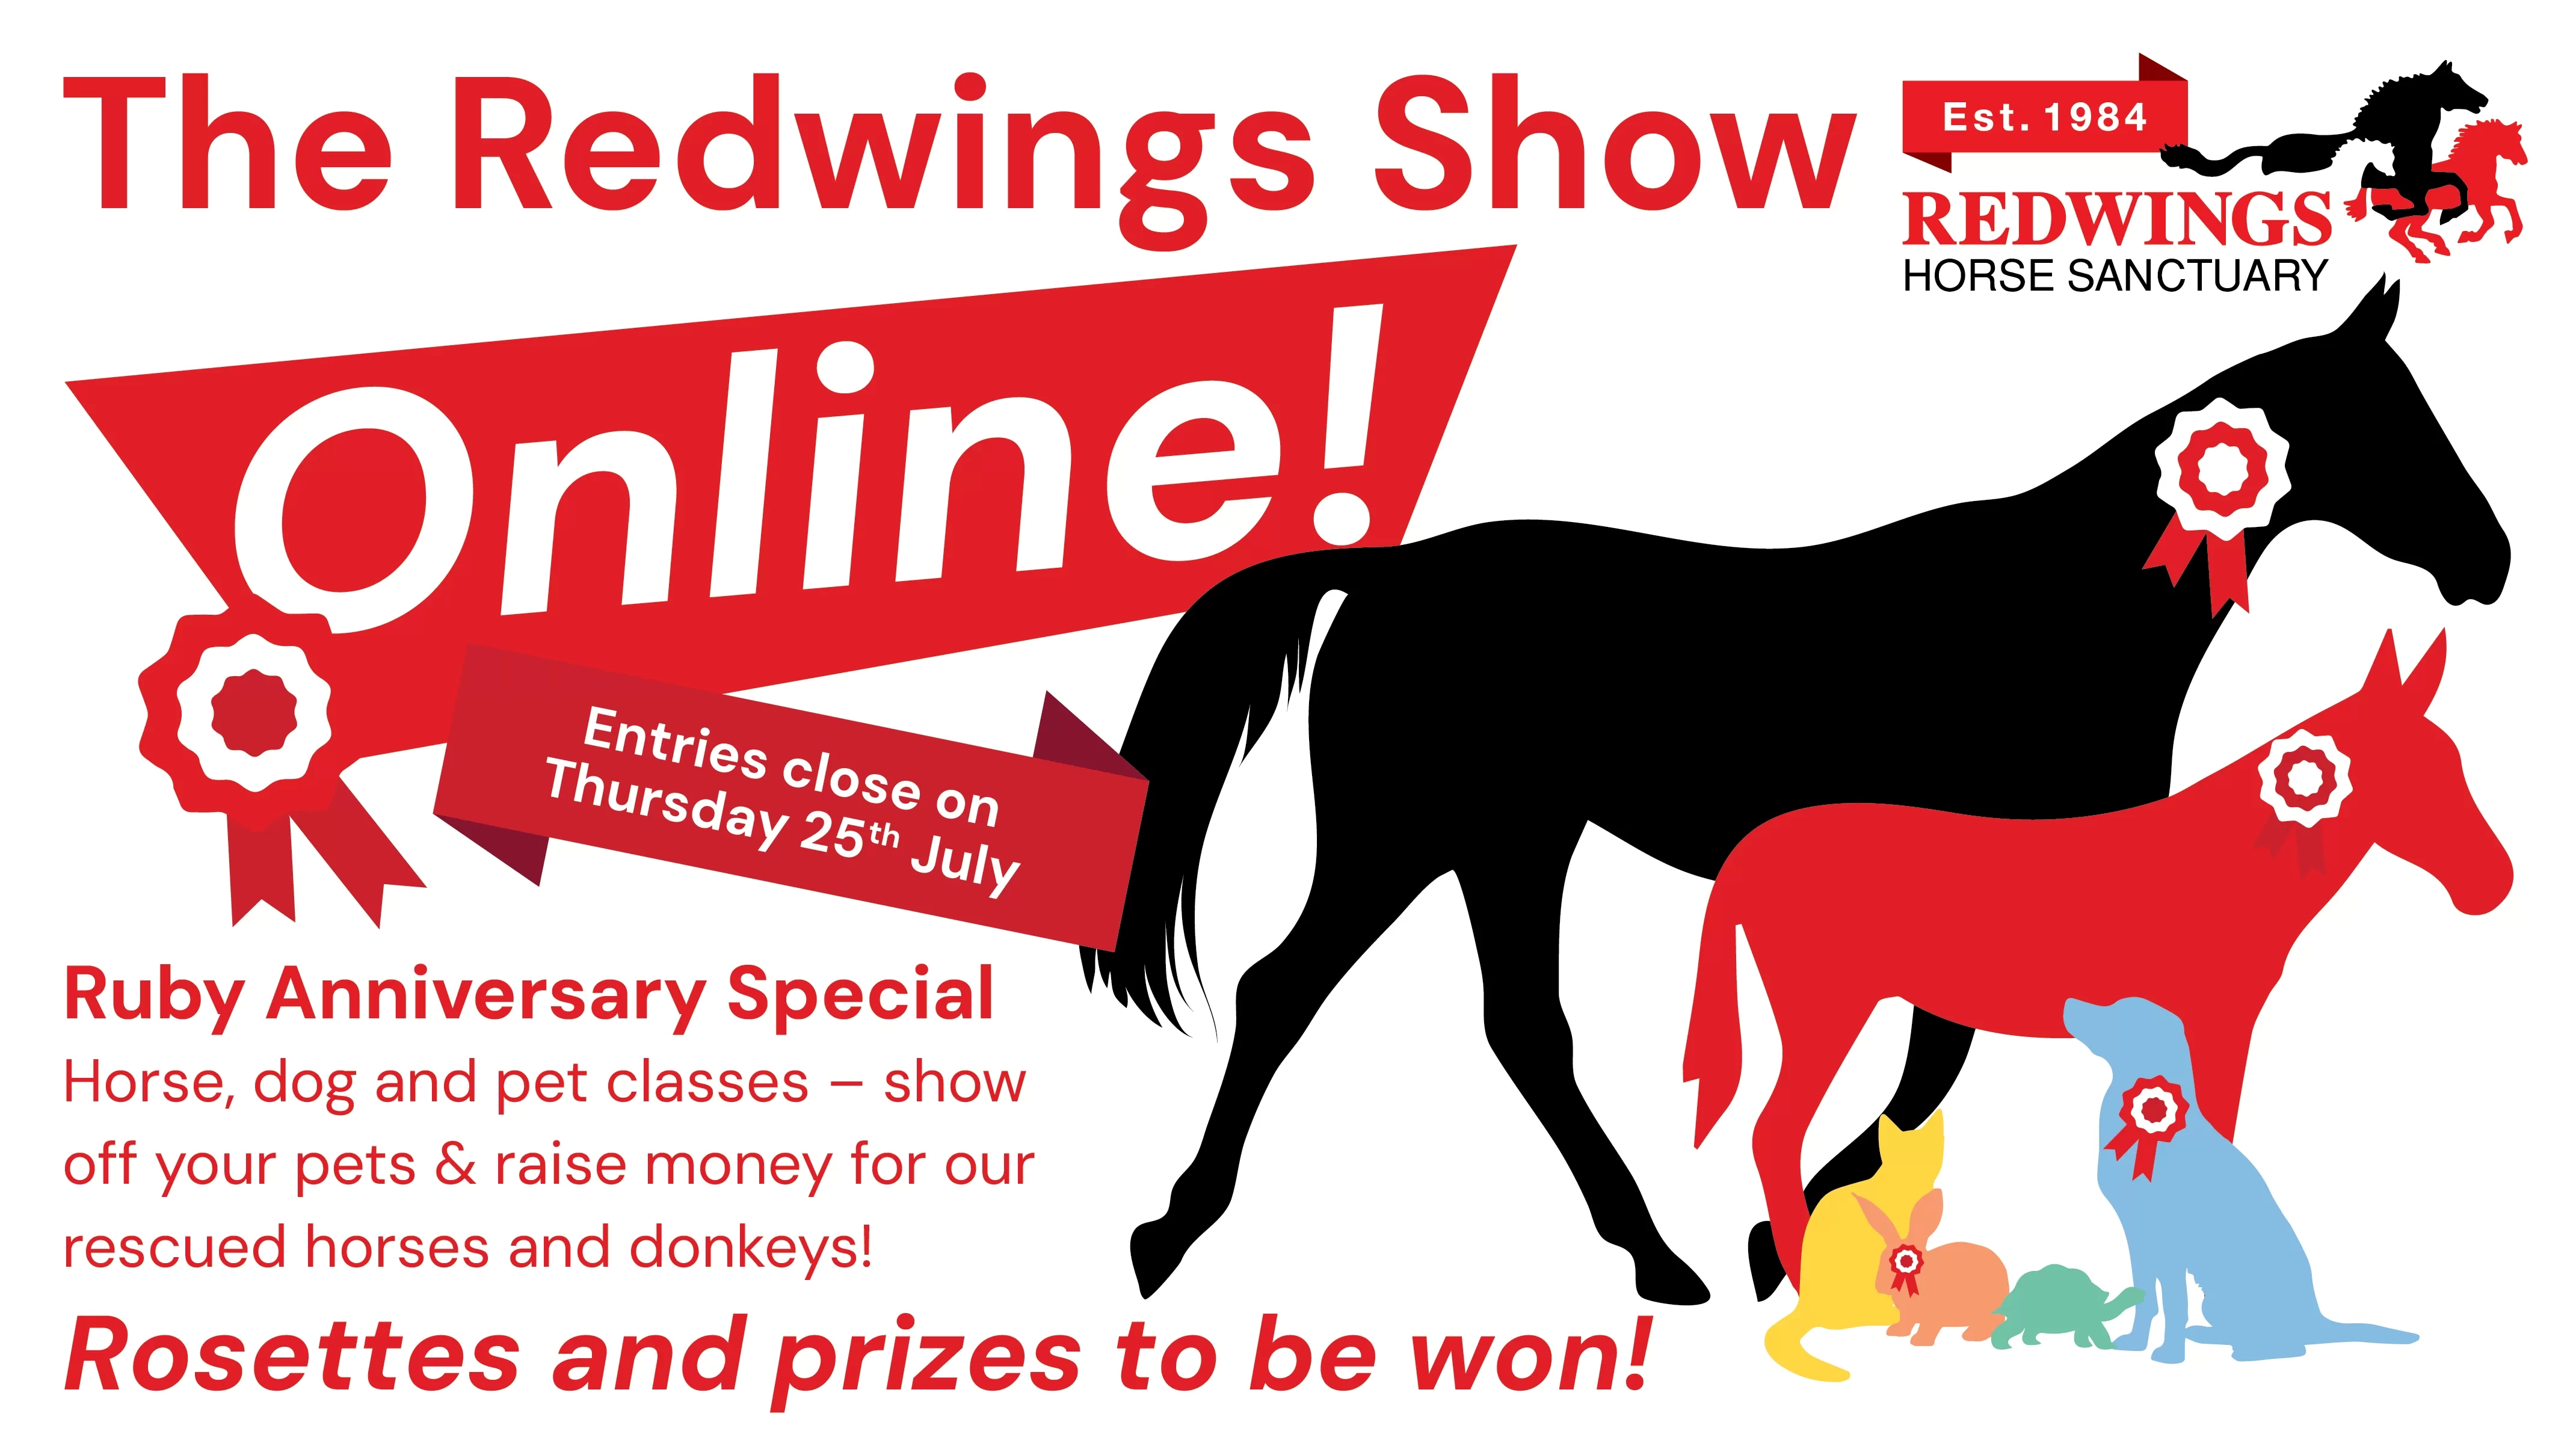 The Redwings Online Show is back!